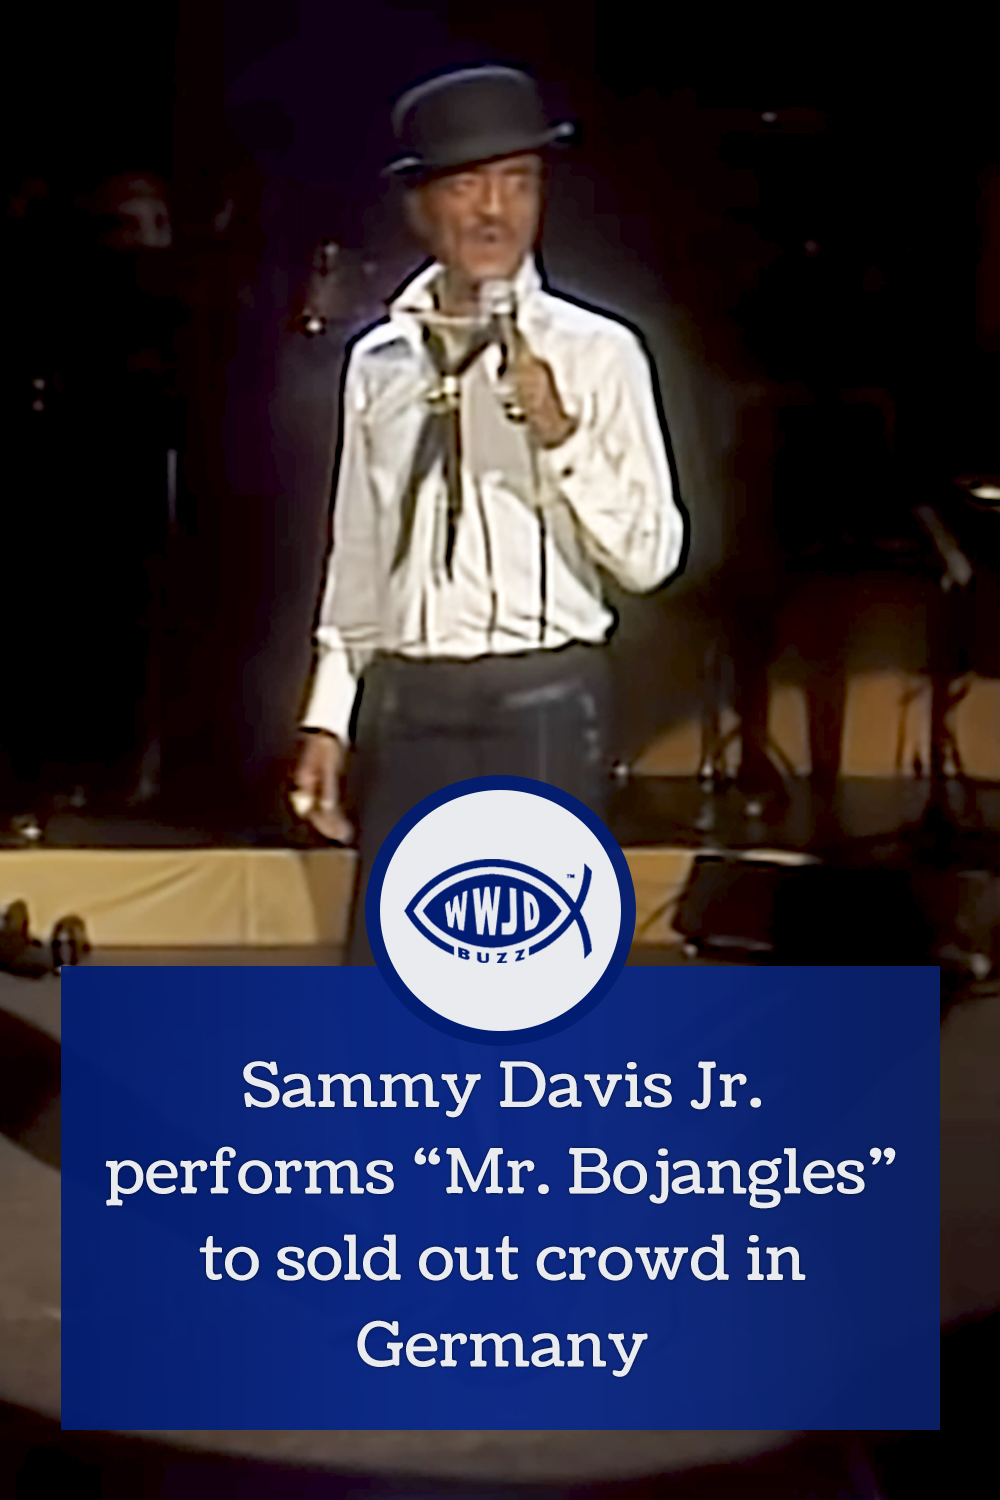 Sammy Davis Jr. performs “Mr. Bojangles” to sold out crowd in Germany